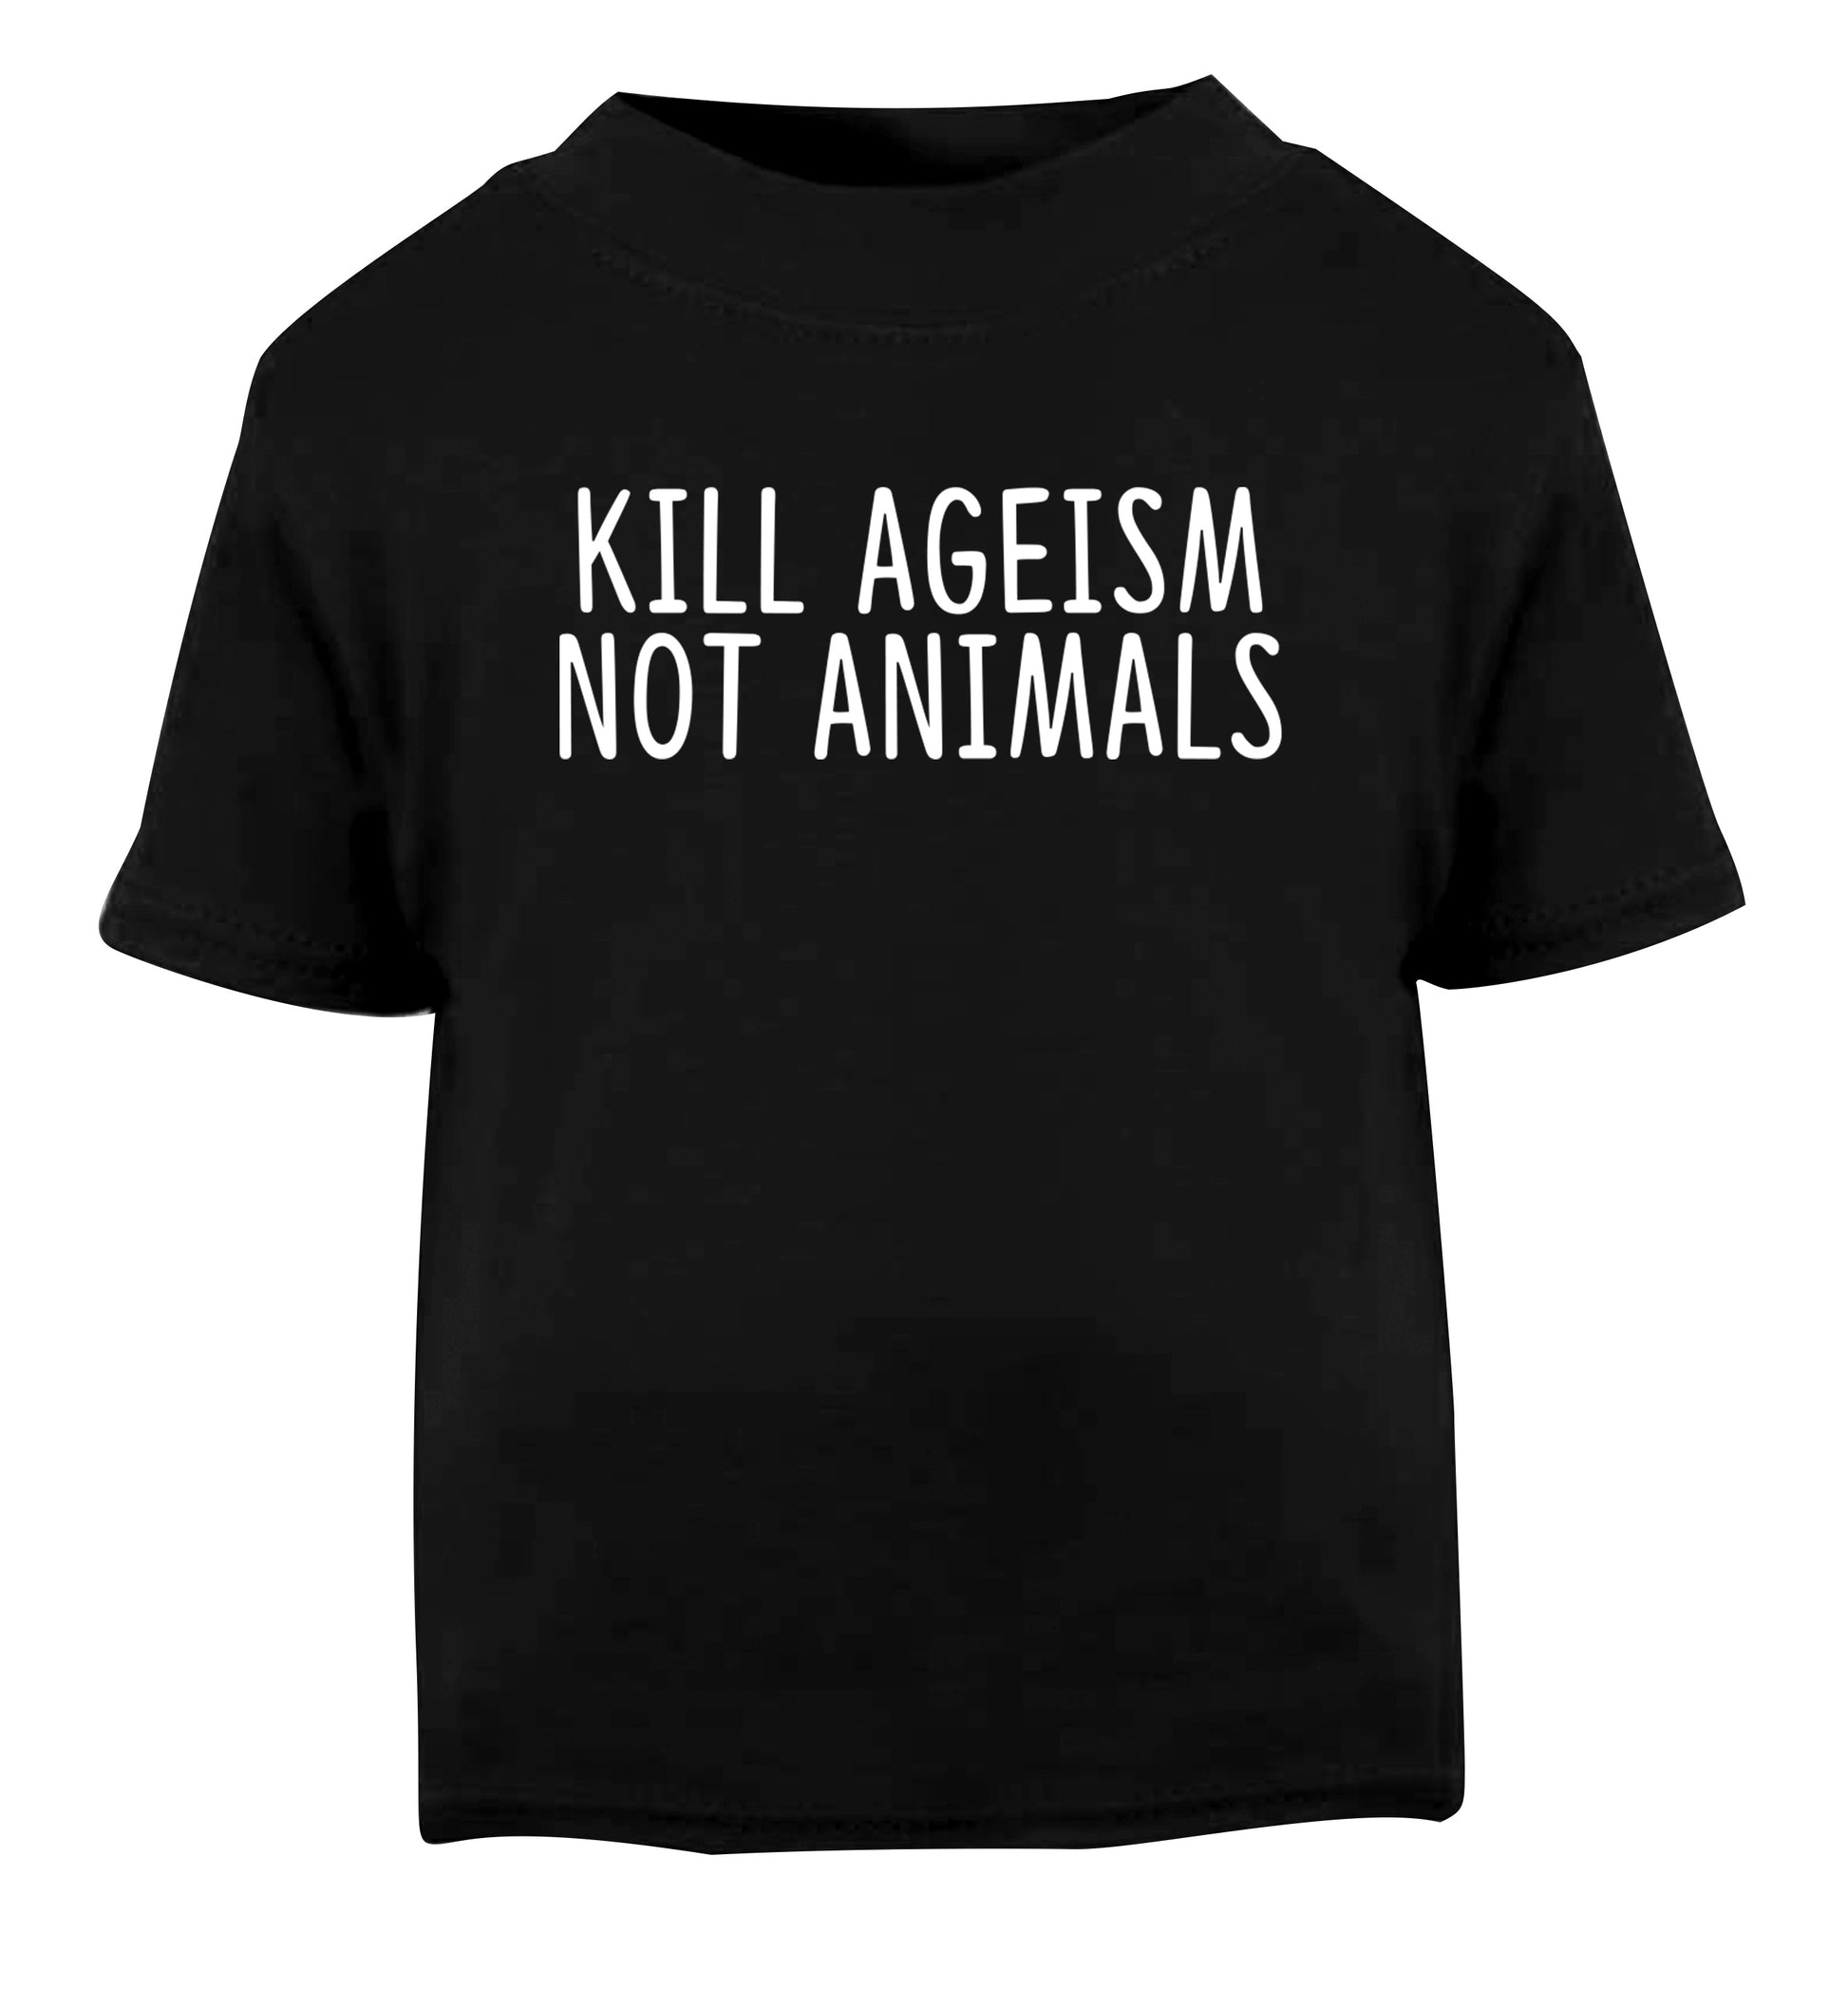 Kill Ageism Not Animals Black Baby Toddler Tshirt 2 years